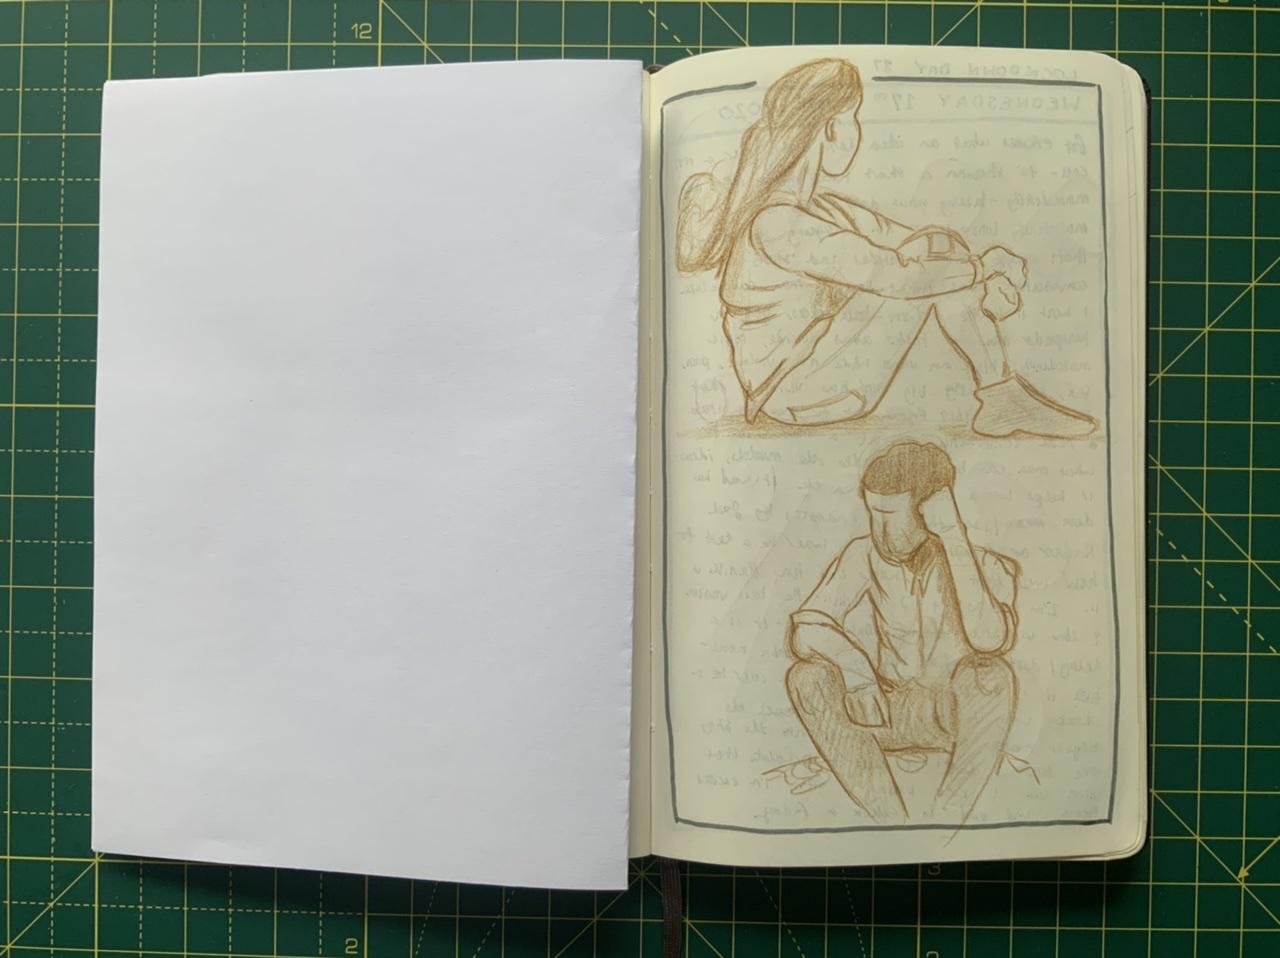 Pencil sketches from Adam Westbrook&rsquo;s sketchbook